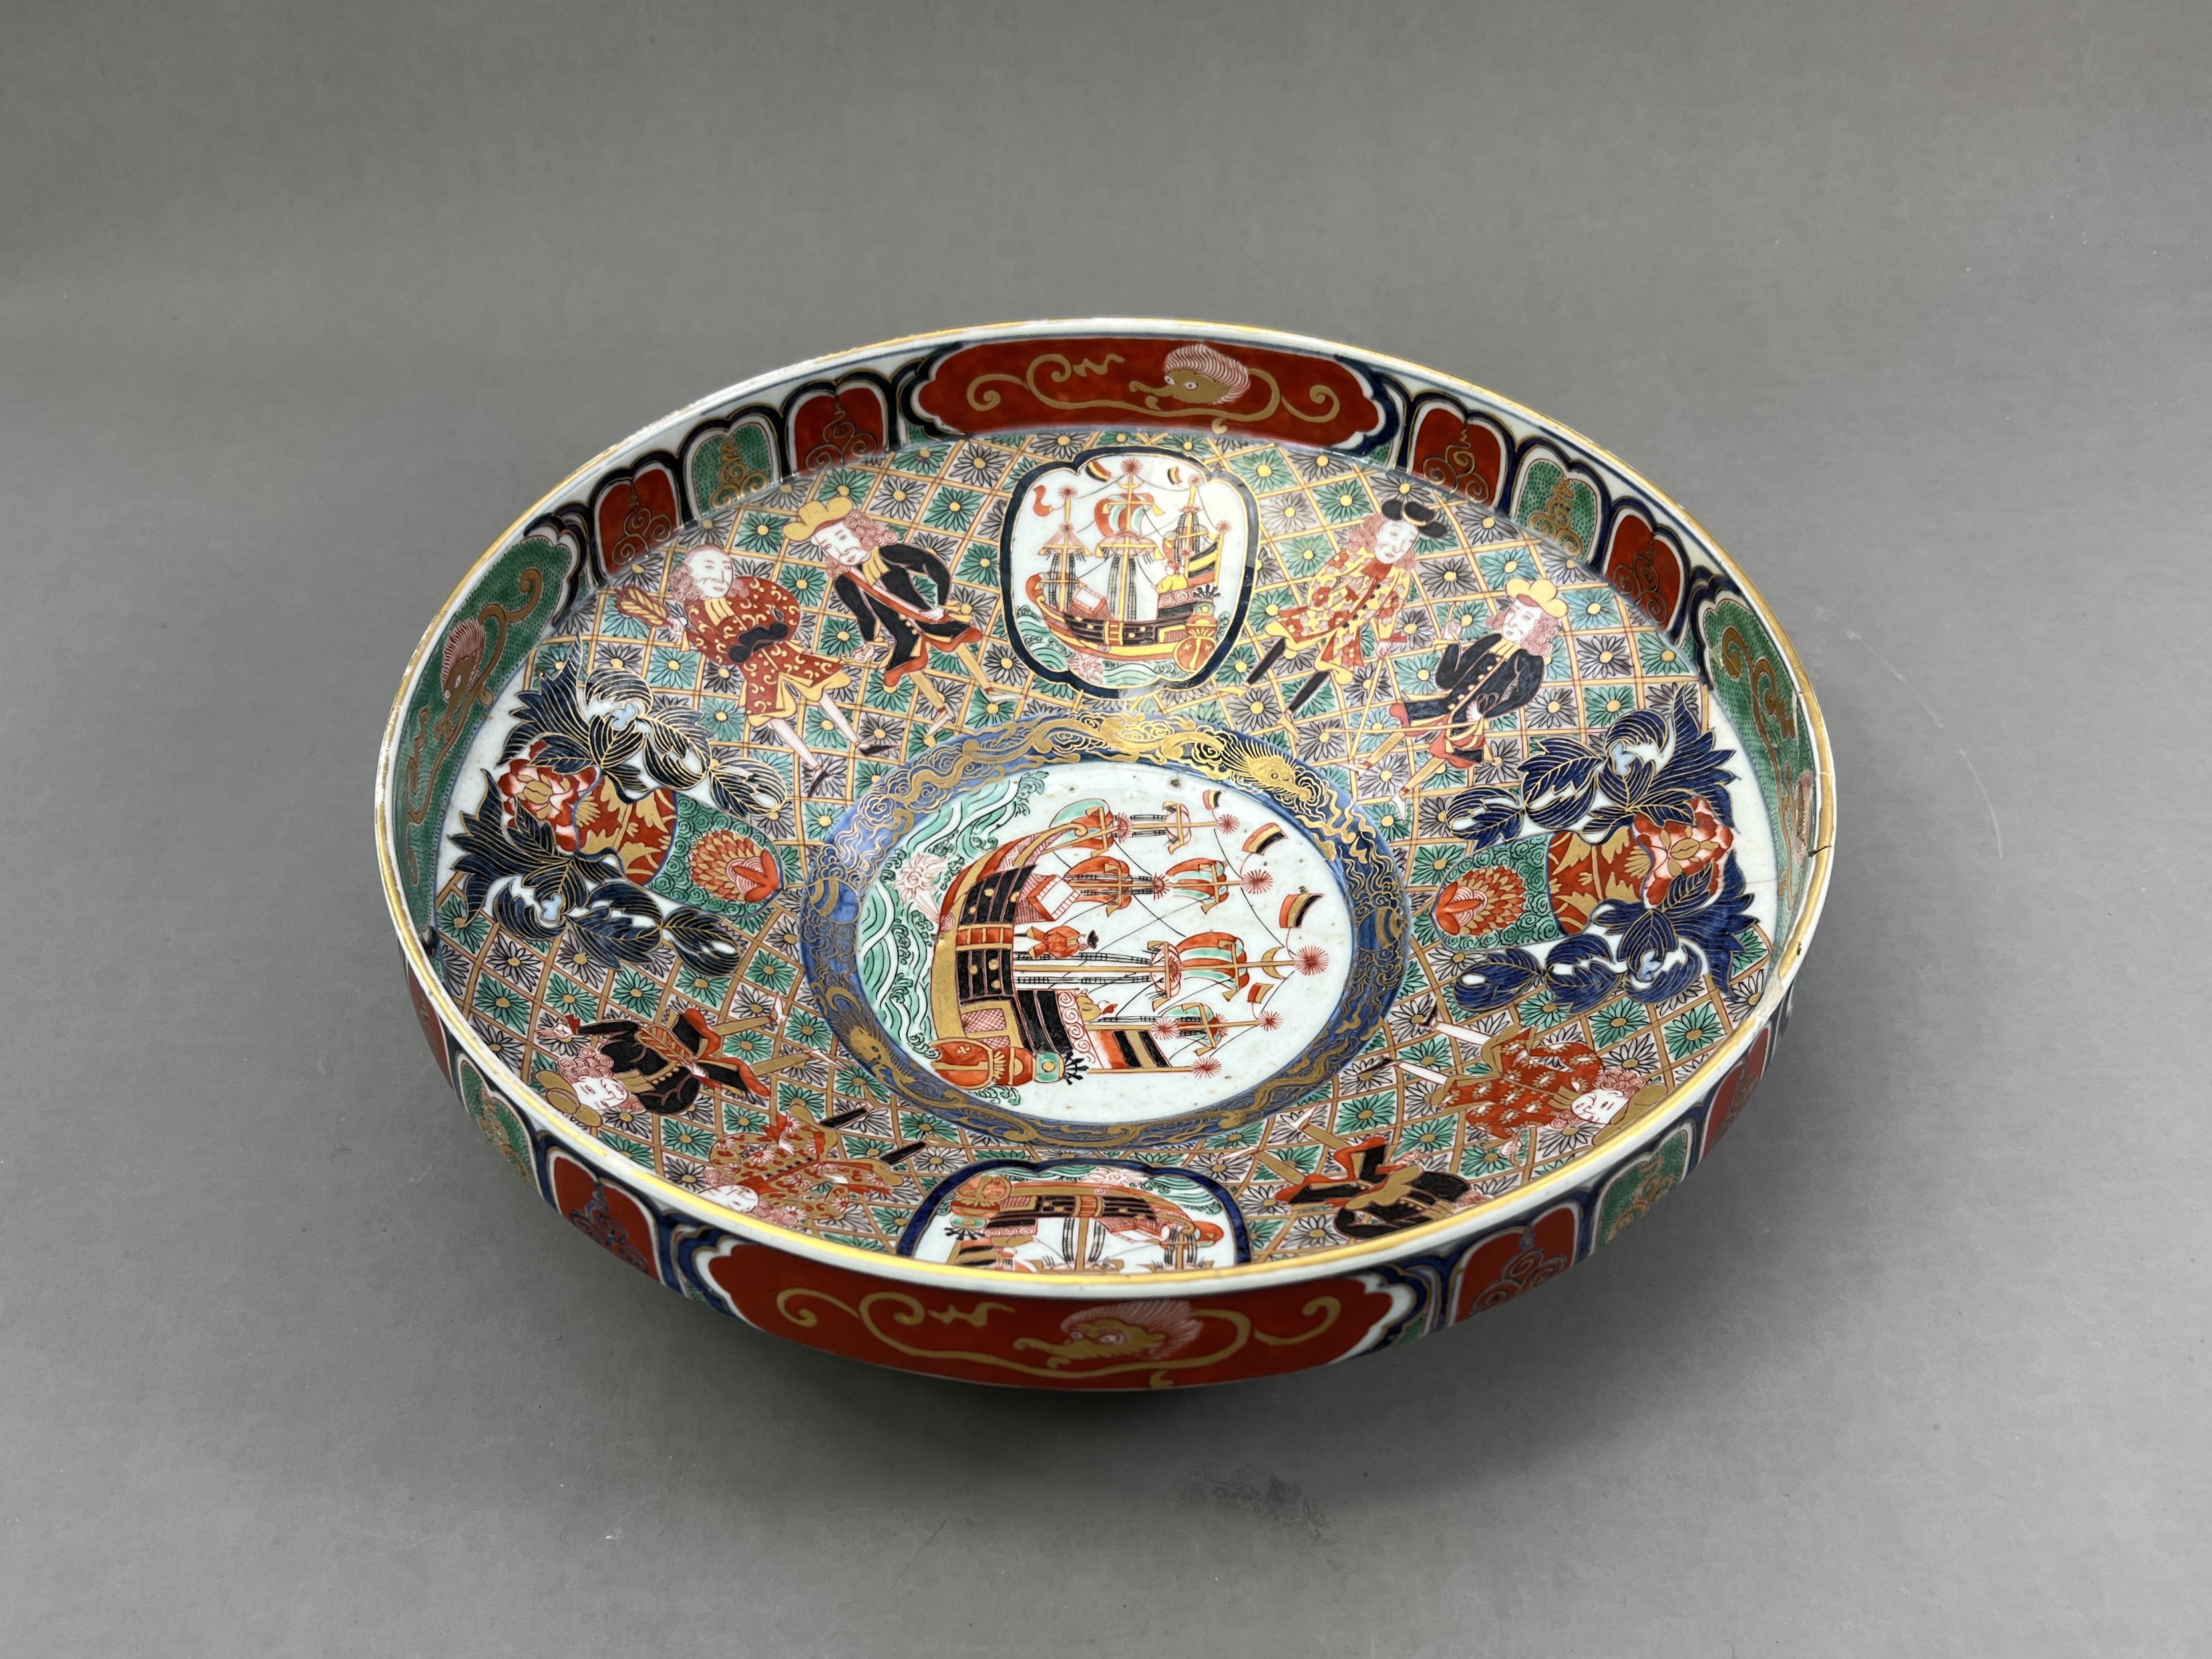 Four Japanese porcelain items, 19th centuryJapanese porcelain, 19th century, the four attractive - Image 15 of 23